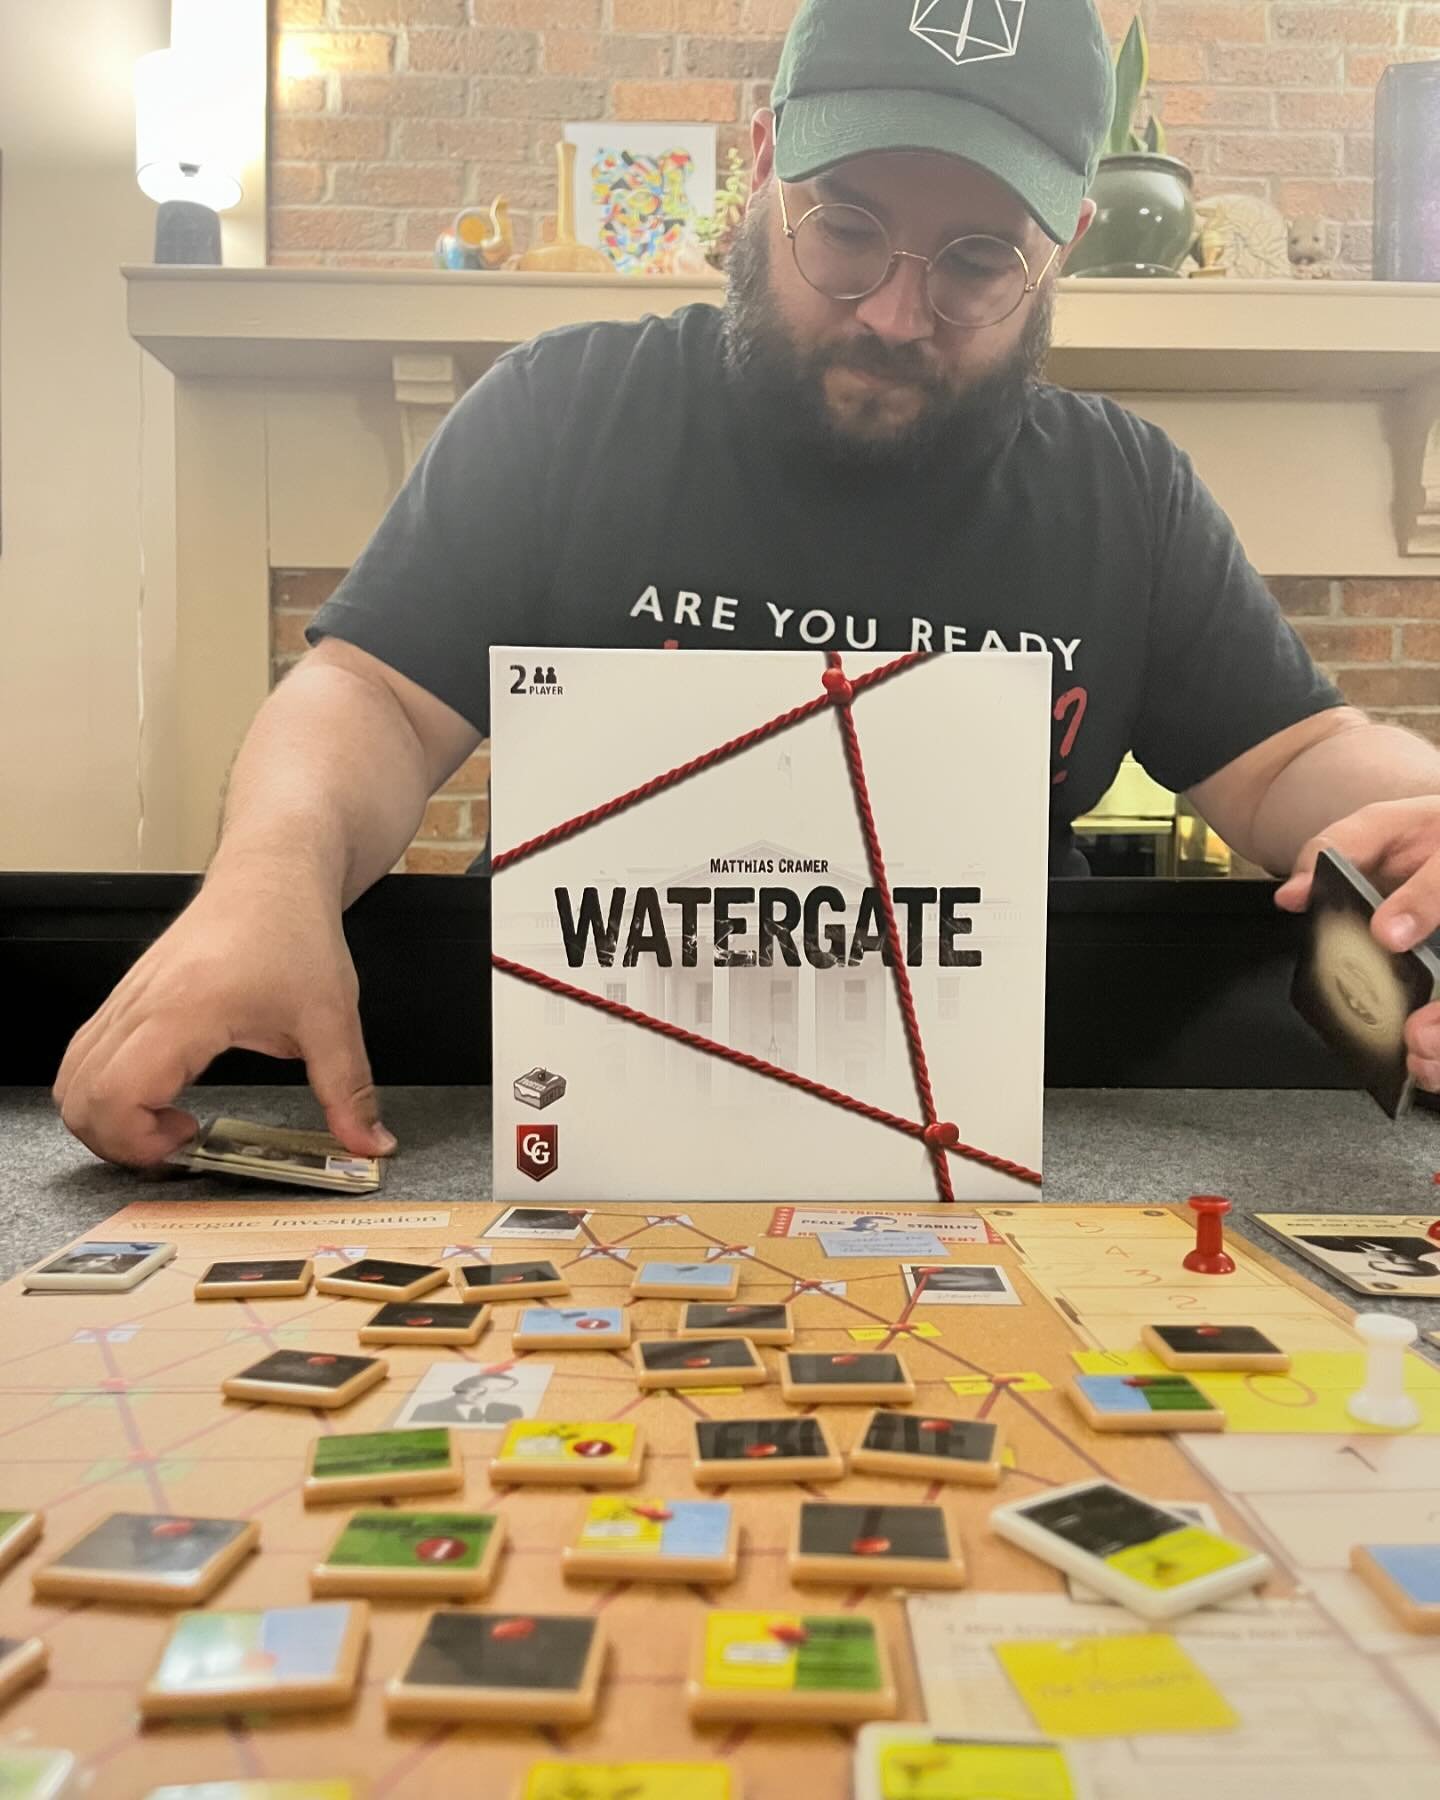 Watergate 🔍

Our game came down to the final tile pull. Cards were thrown and Kristina danced her way to victory! 

Compete as Nixon&rsquo;s team or journalists, using cards strategically to gather evidence or cover up secrets. Fast-paced, intense, 